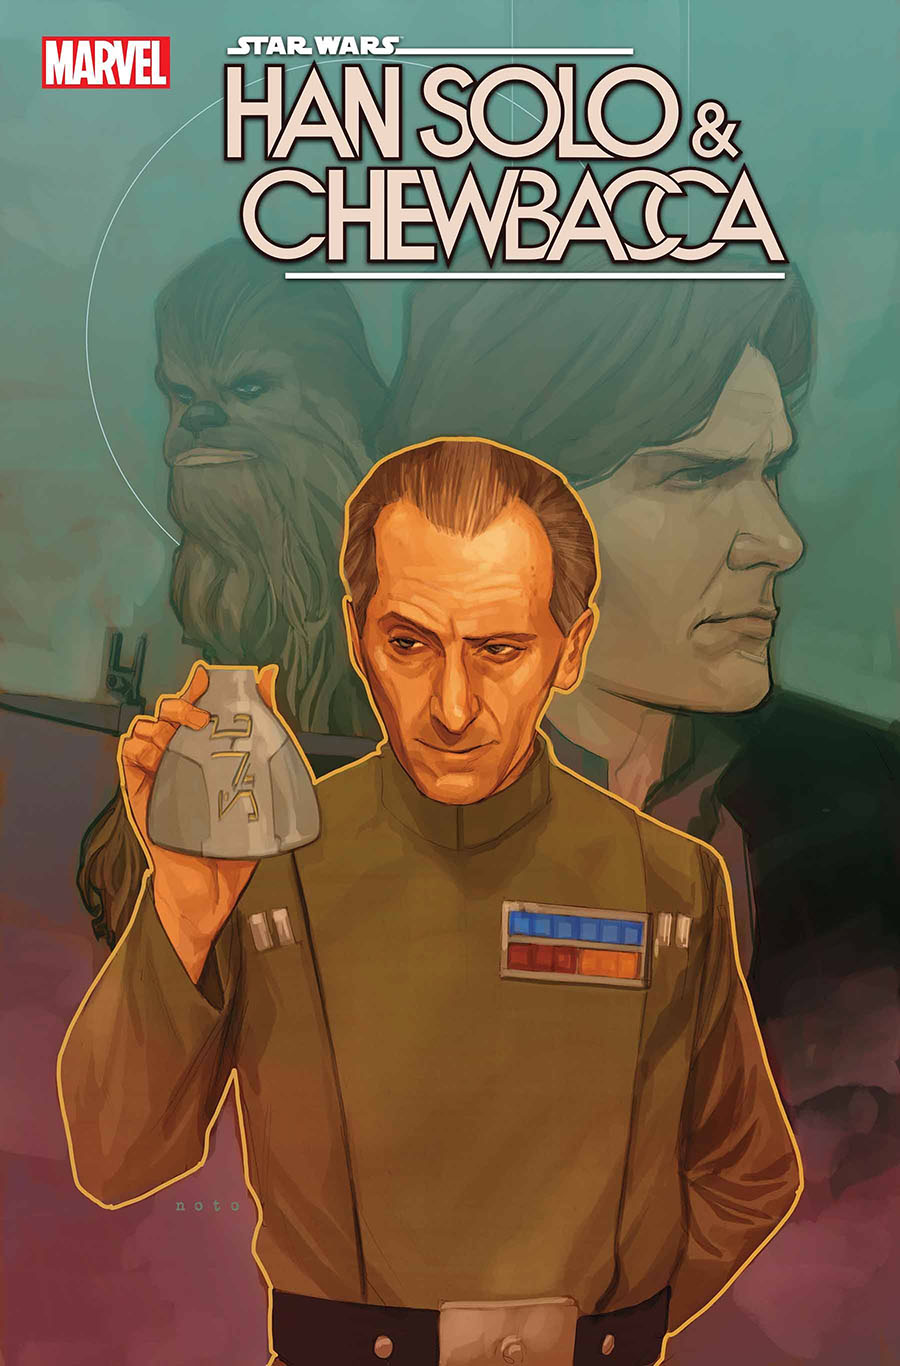 Star Wars Han Solo & Chewbacca #8 Cover A Regular Phil Noto Cover